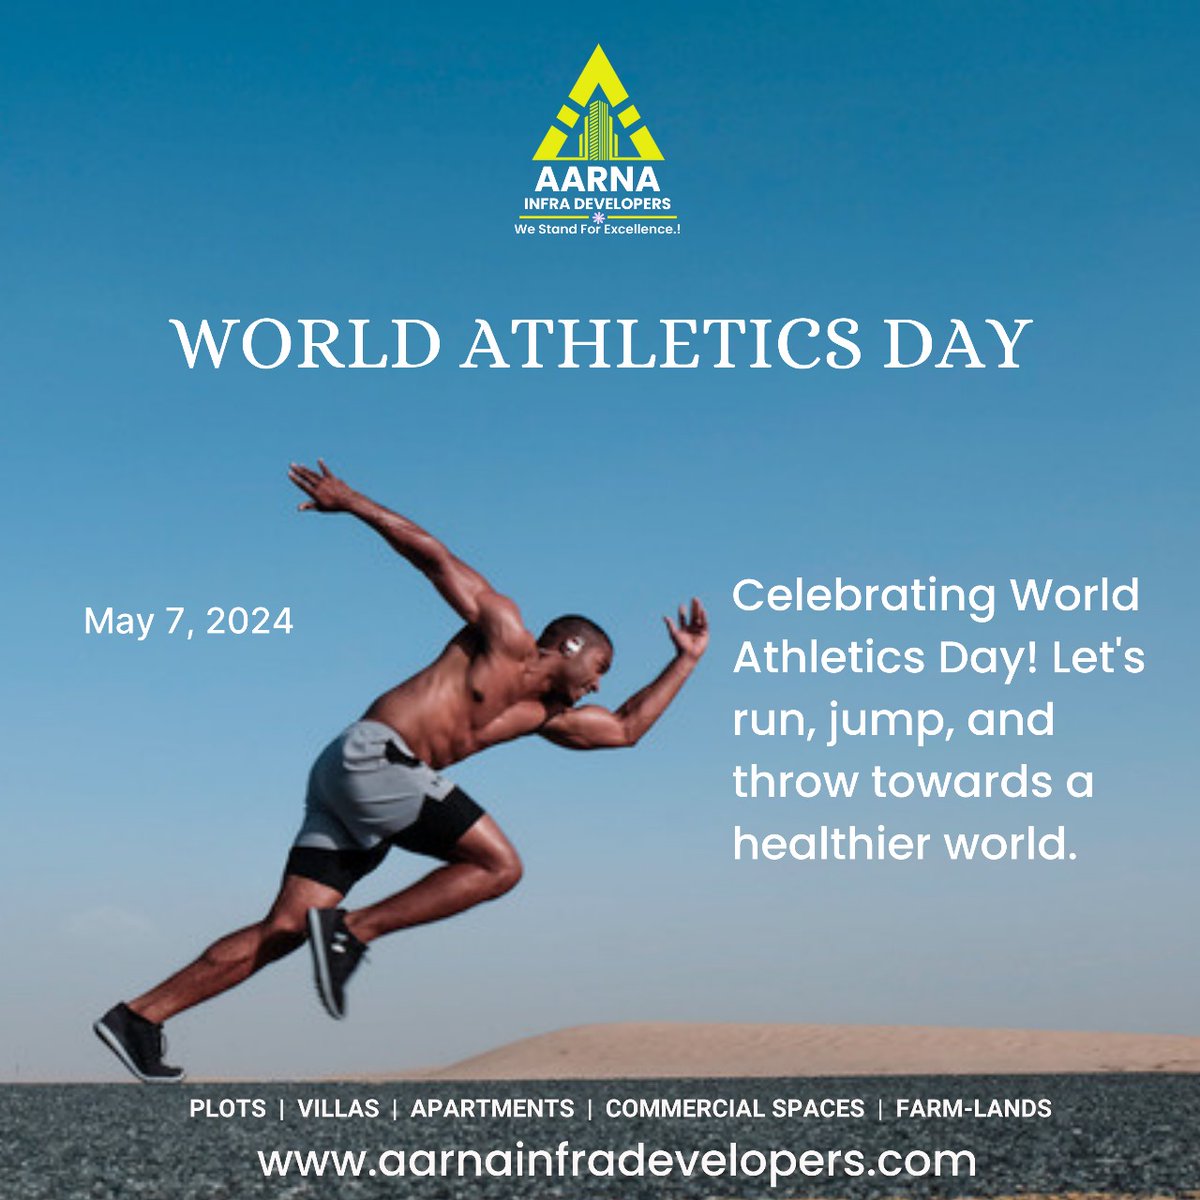 Happy World Athletics Day! 🌟 

Let's celebrate the spirit of athleticism and the power of sports to inspire and unite us all. 

#WorldAthleticsDay #AthleticsDay2024 #RunJumpThrow #AthleteLife #SportsInspiration #AarnaInfraDevelopers